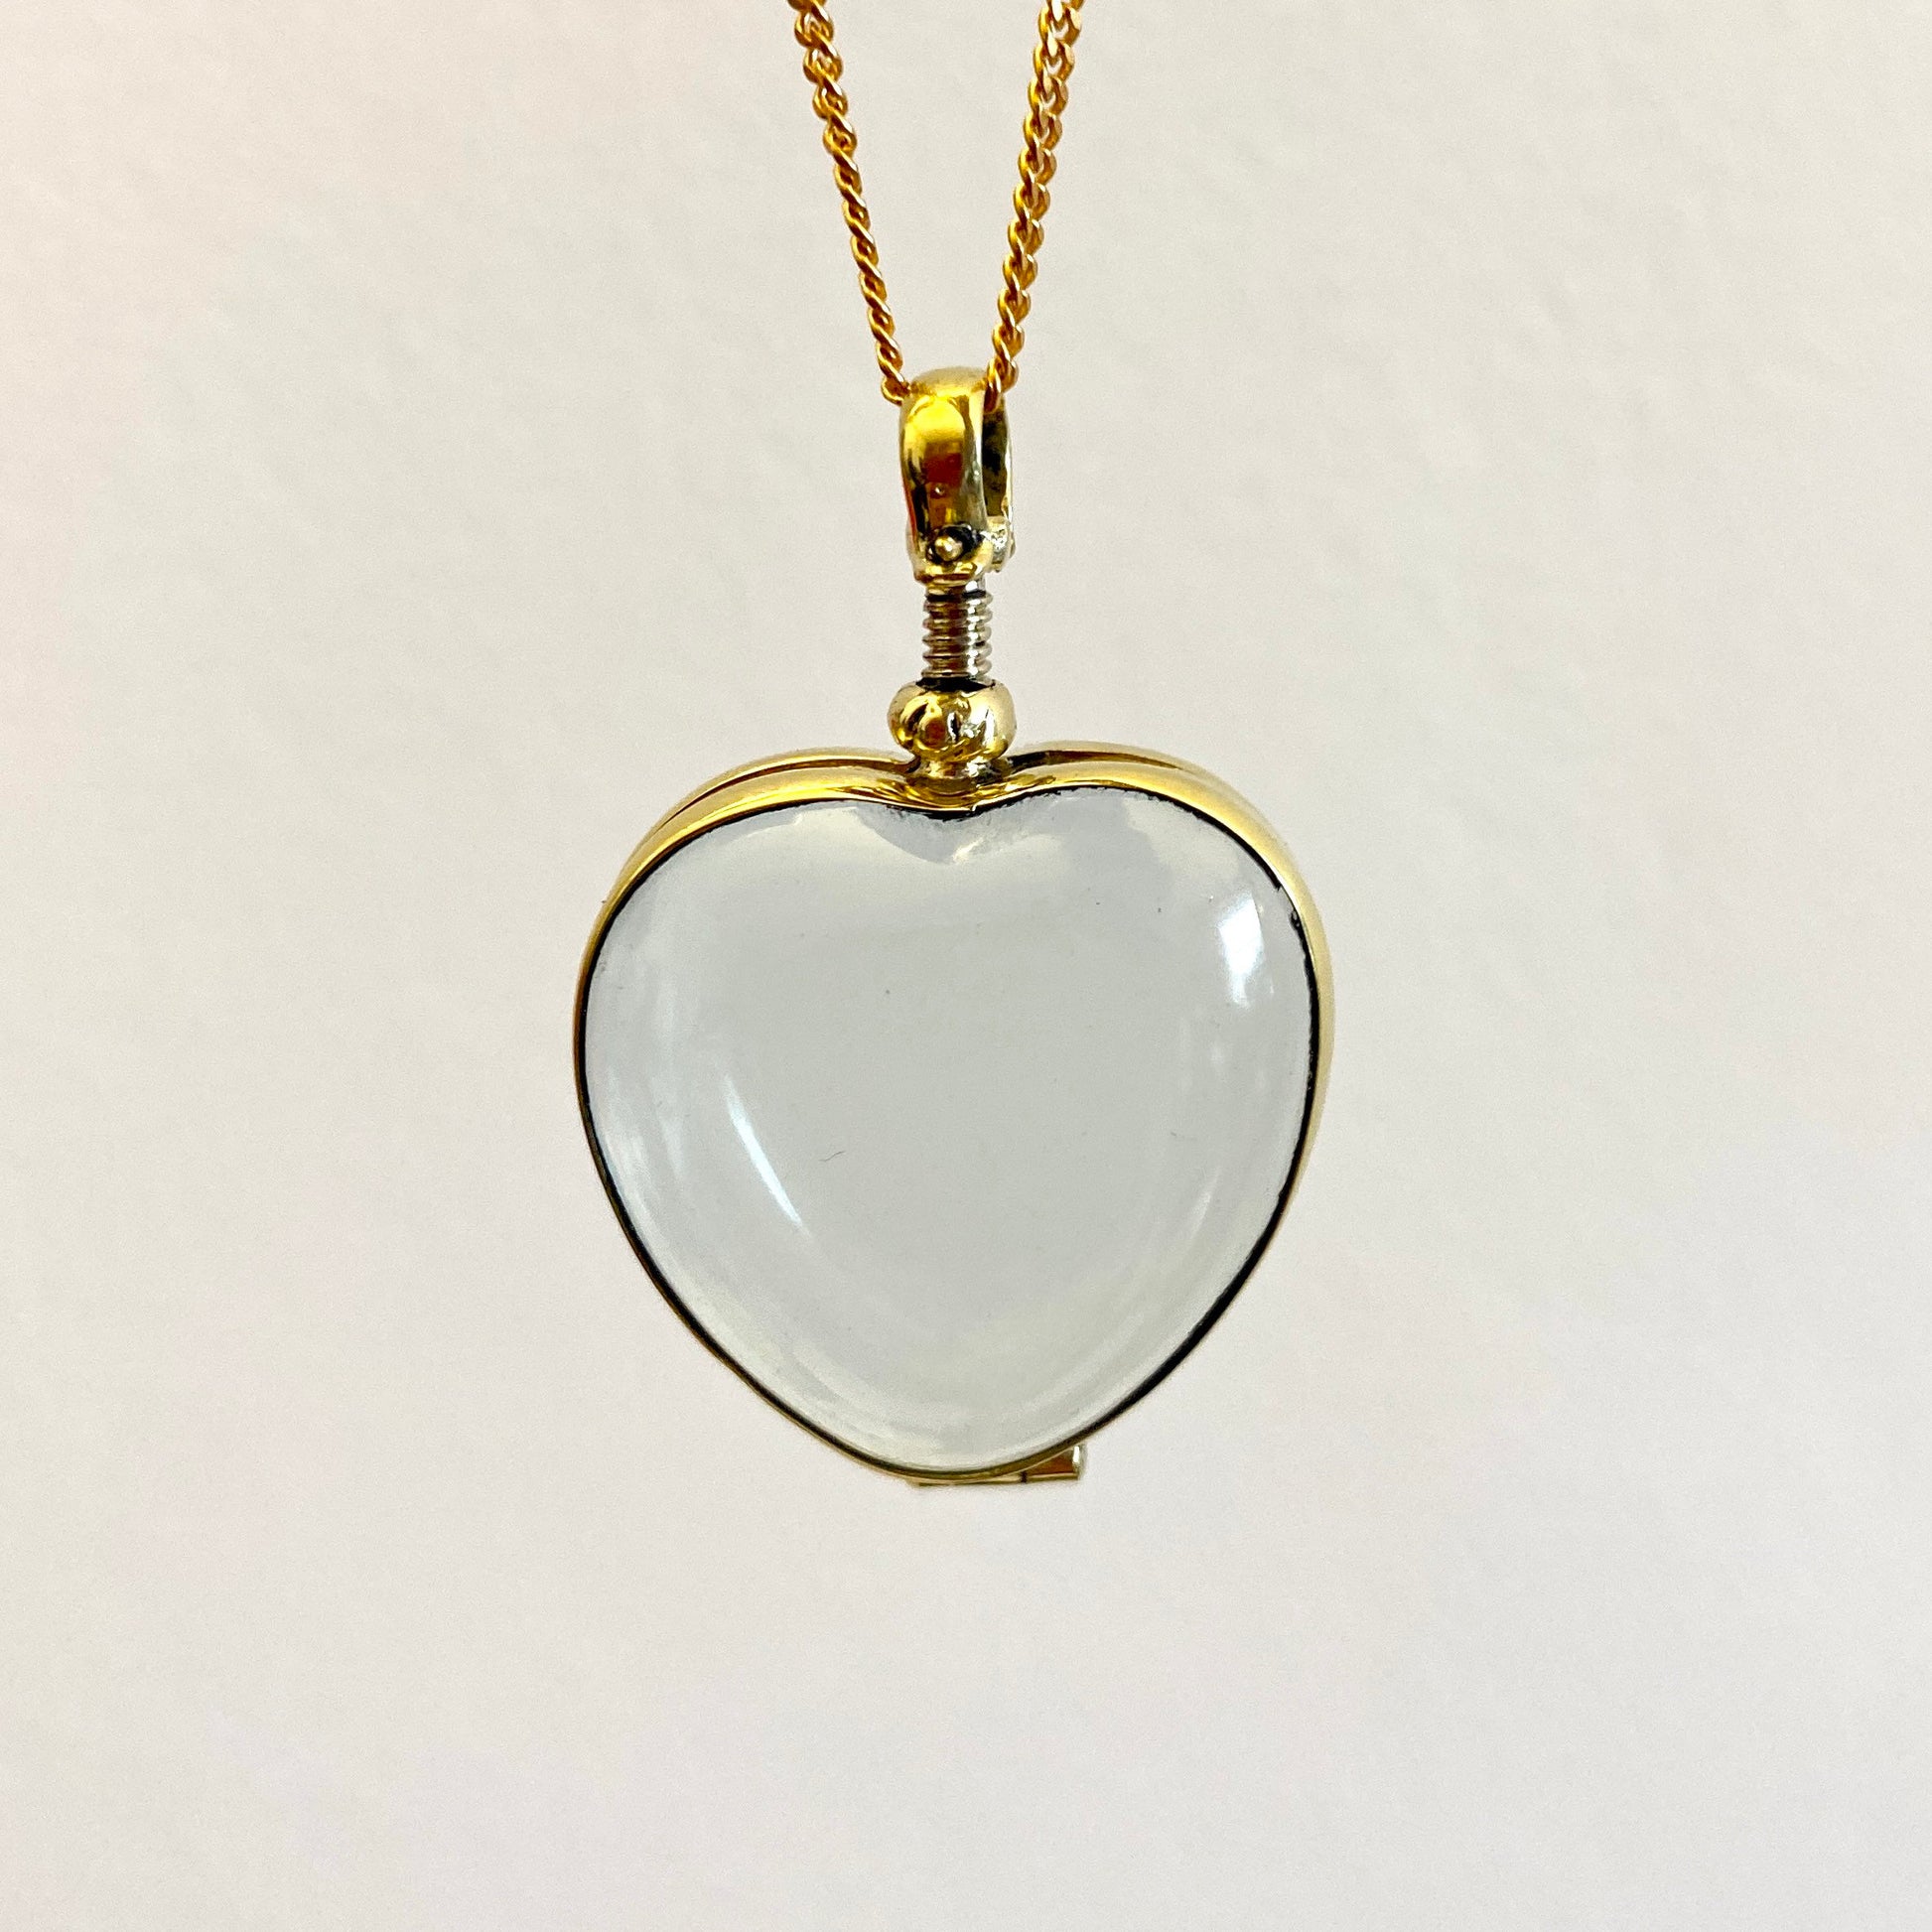 Gold Locket Necklace for Hair Gold Lockets for Gold Photo Locket Necklace Heart Shaped Gold Locket Gold Locket Pendant Necklace Clear Locket